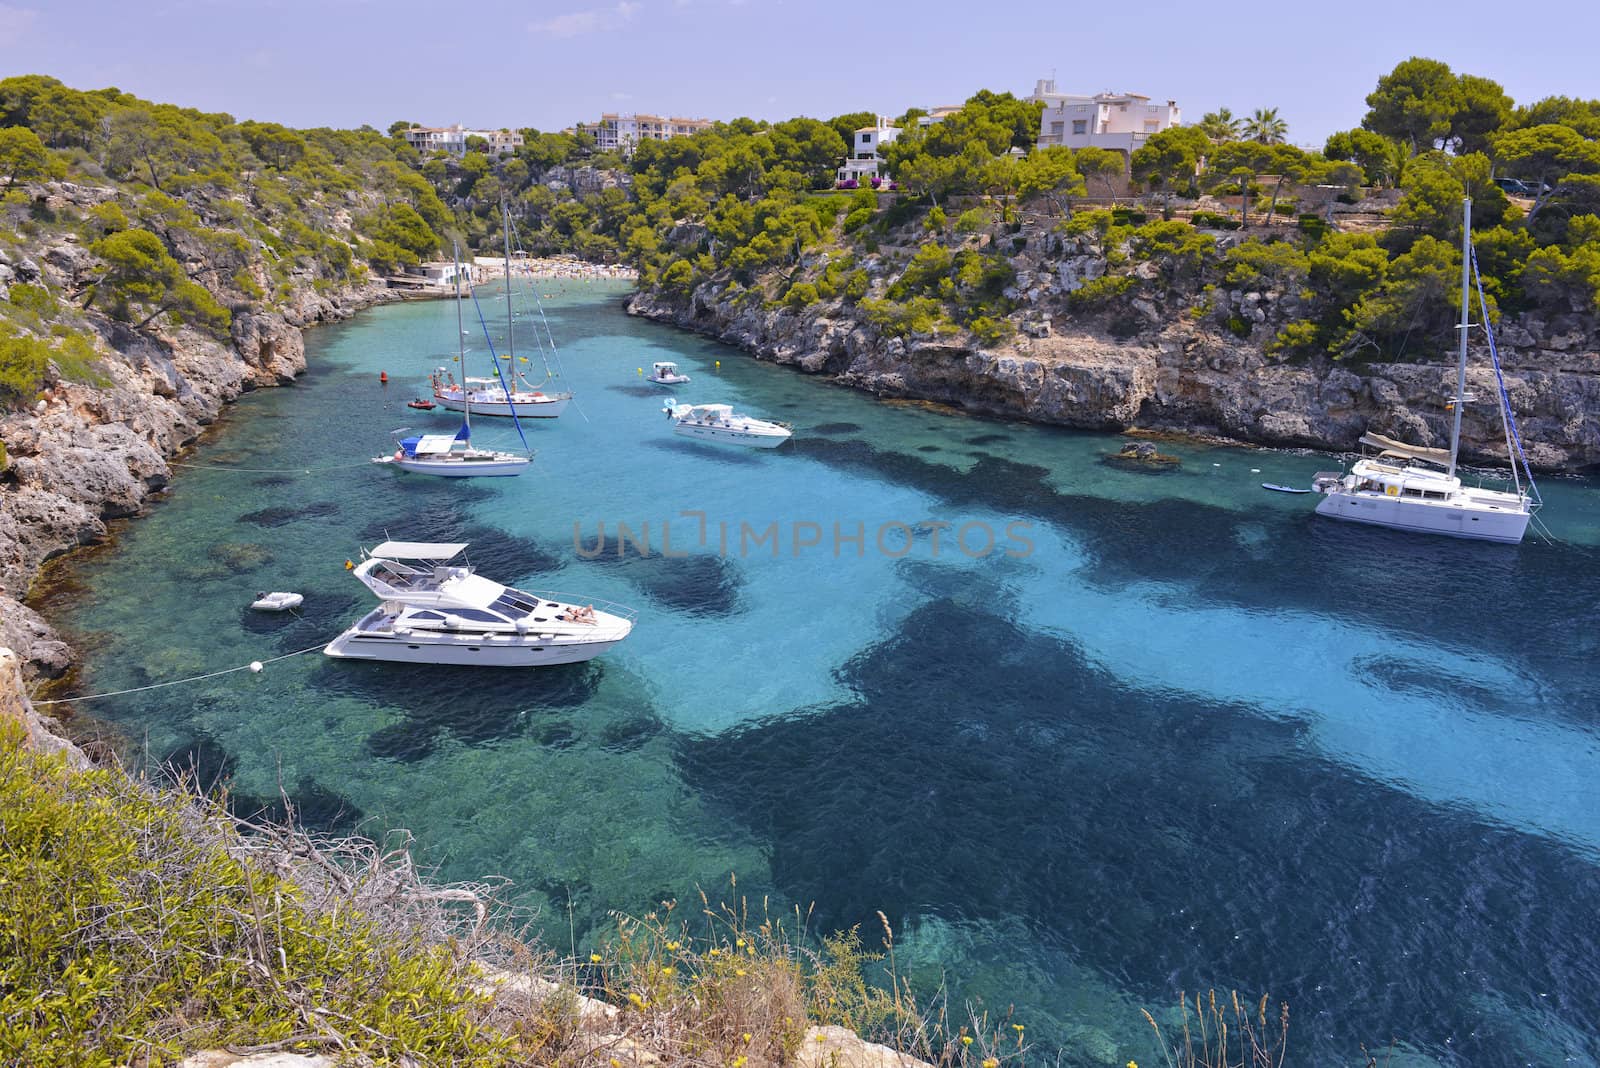 MALLORCA, SPAIN - JULY 17: Crowded Beach With Tourists and Yachts at the Beautiful Bay of Cala Pi on July 17, 2013 in Mallorca, Spain. 